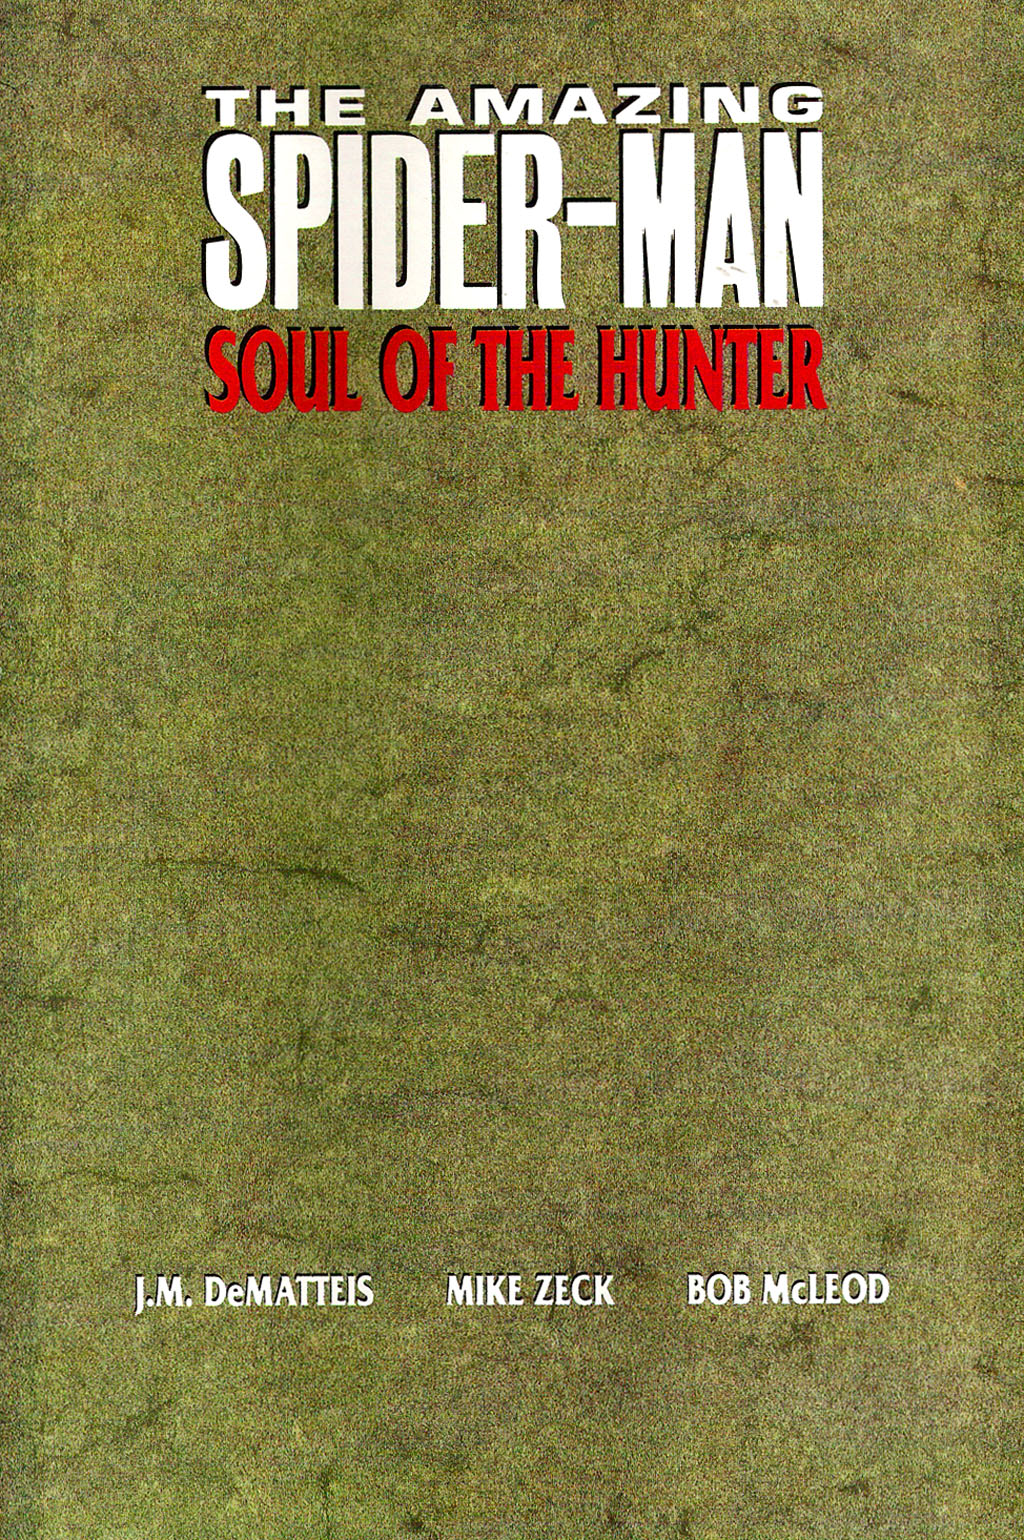 Read online The Amazing Spider-Man: Soul of the Hunter comic -  Issue # Full - 3